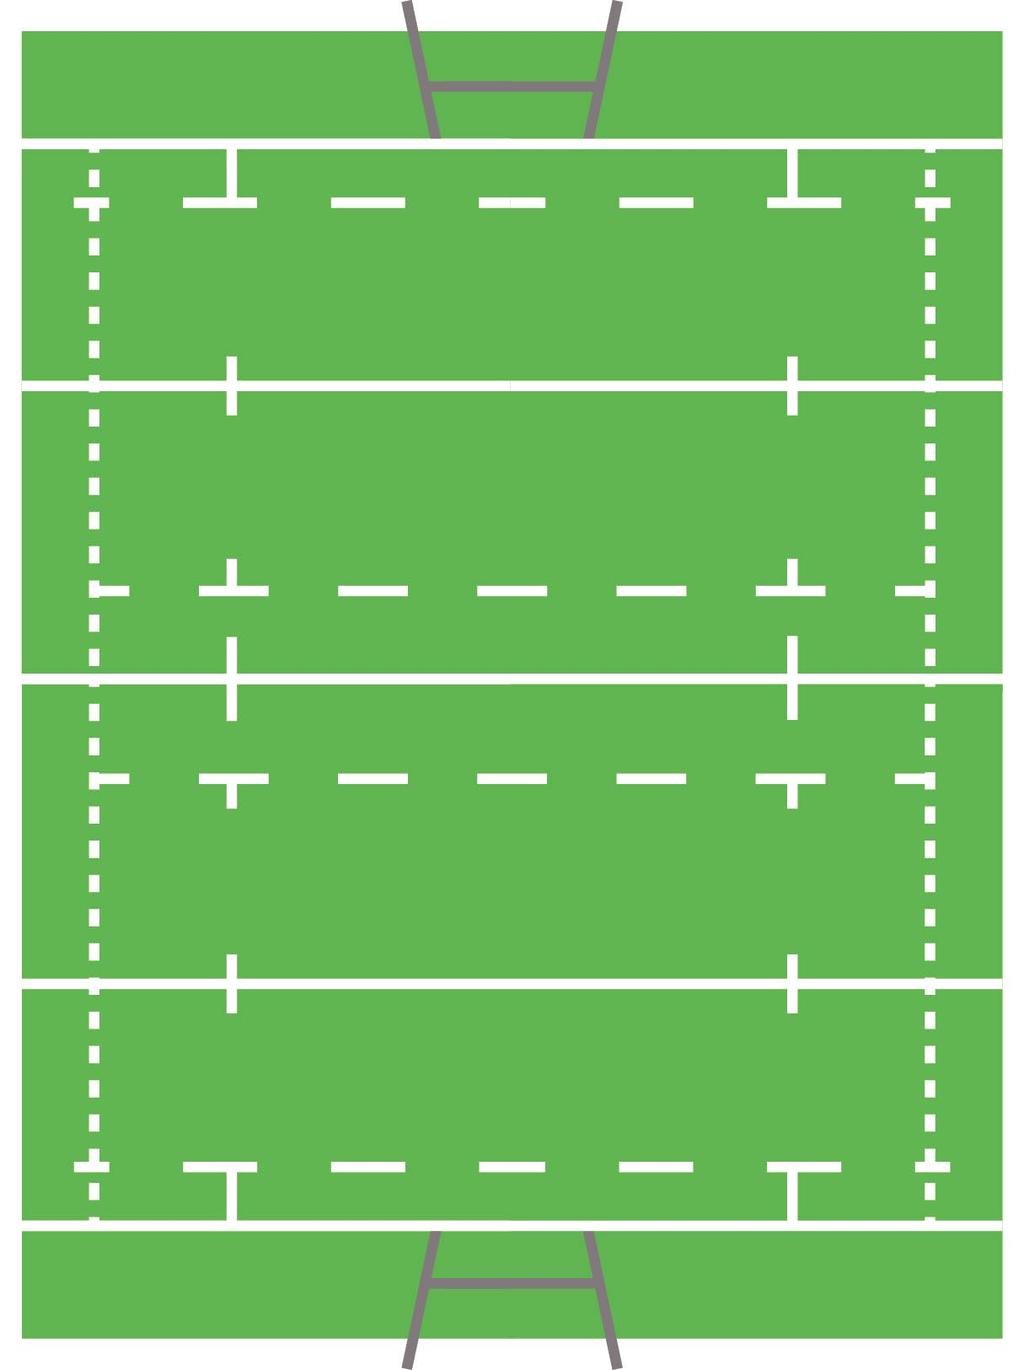 Problem Solving - Scoring points in rugby In rugby the scoring is made up of points.